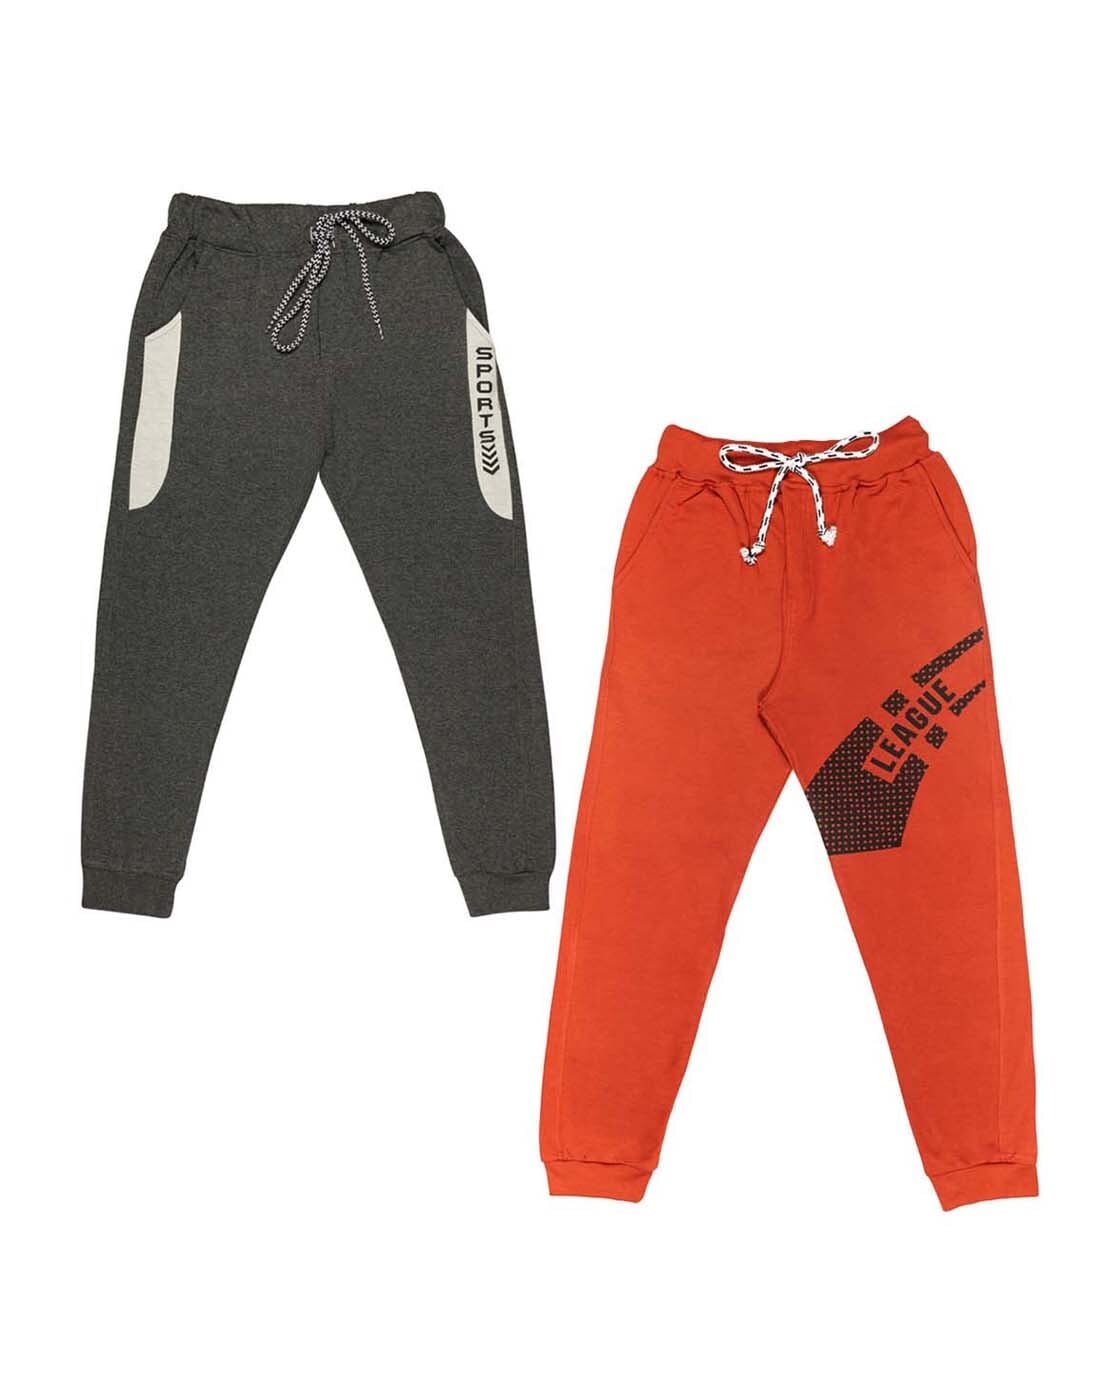 Men's Athletic pants, warmups, track pants for your team